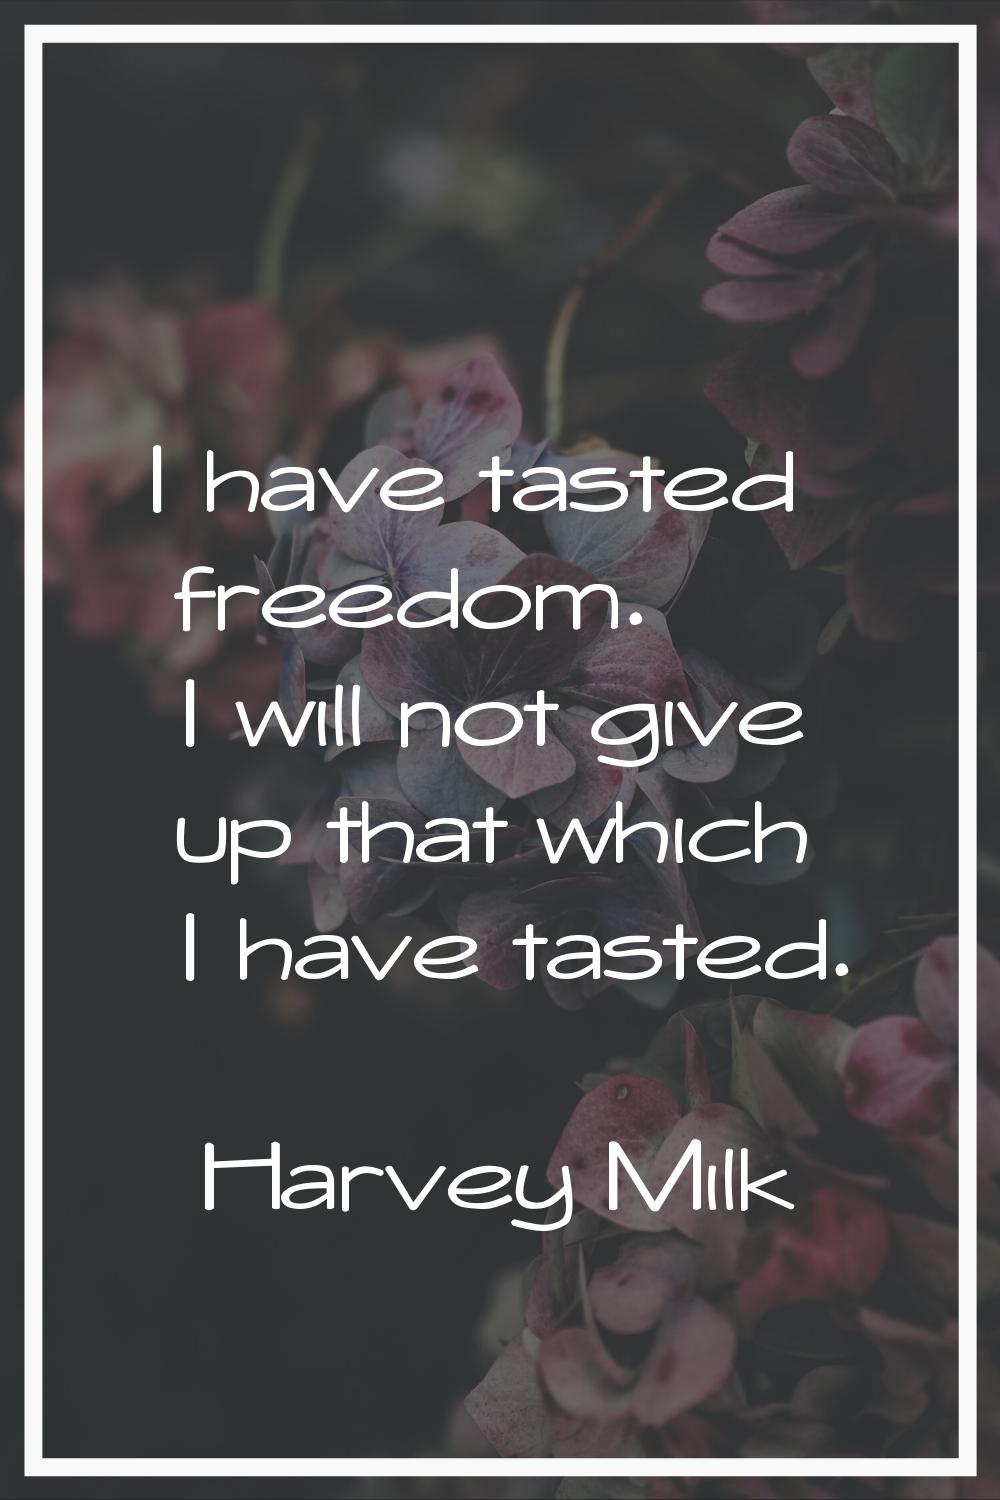 I have tasted freedom. I will not give up that which I have tasted.